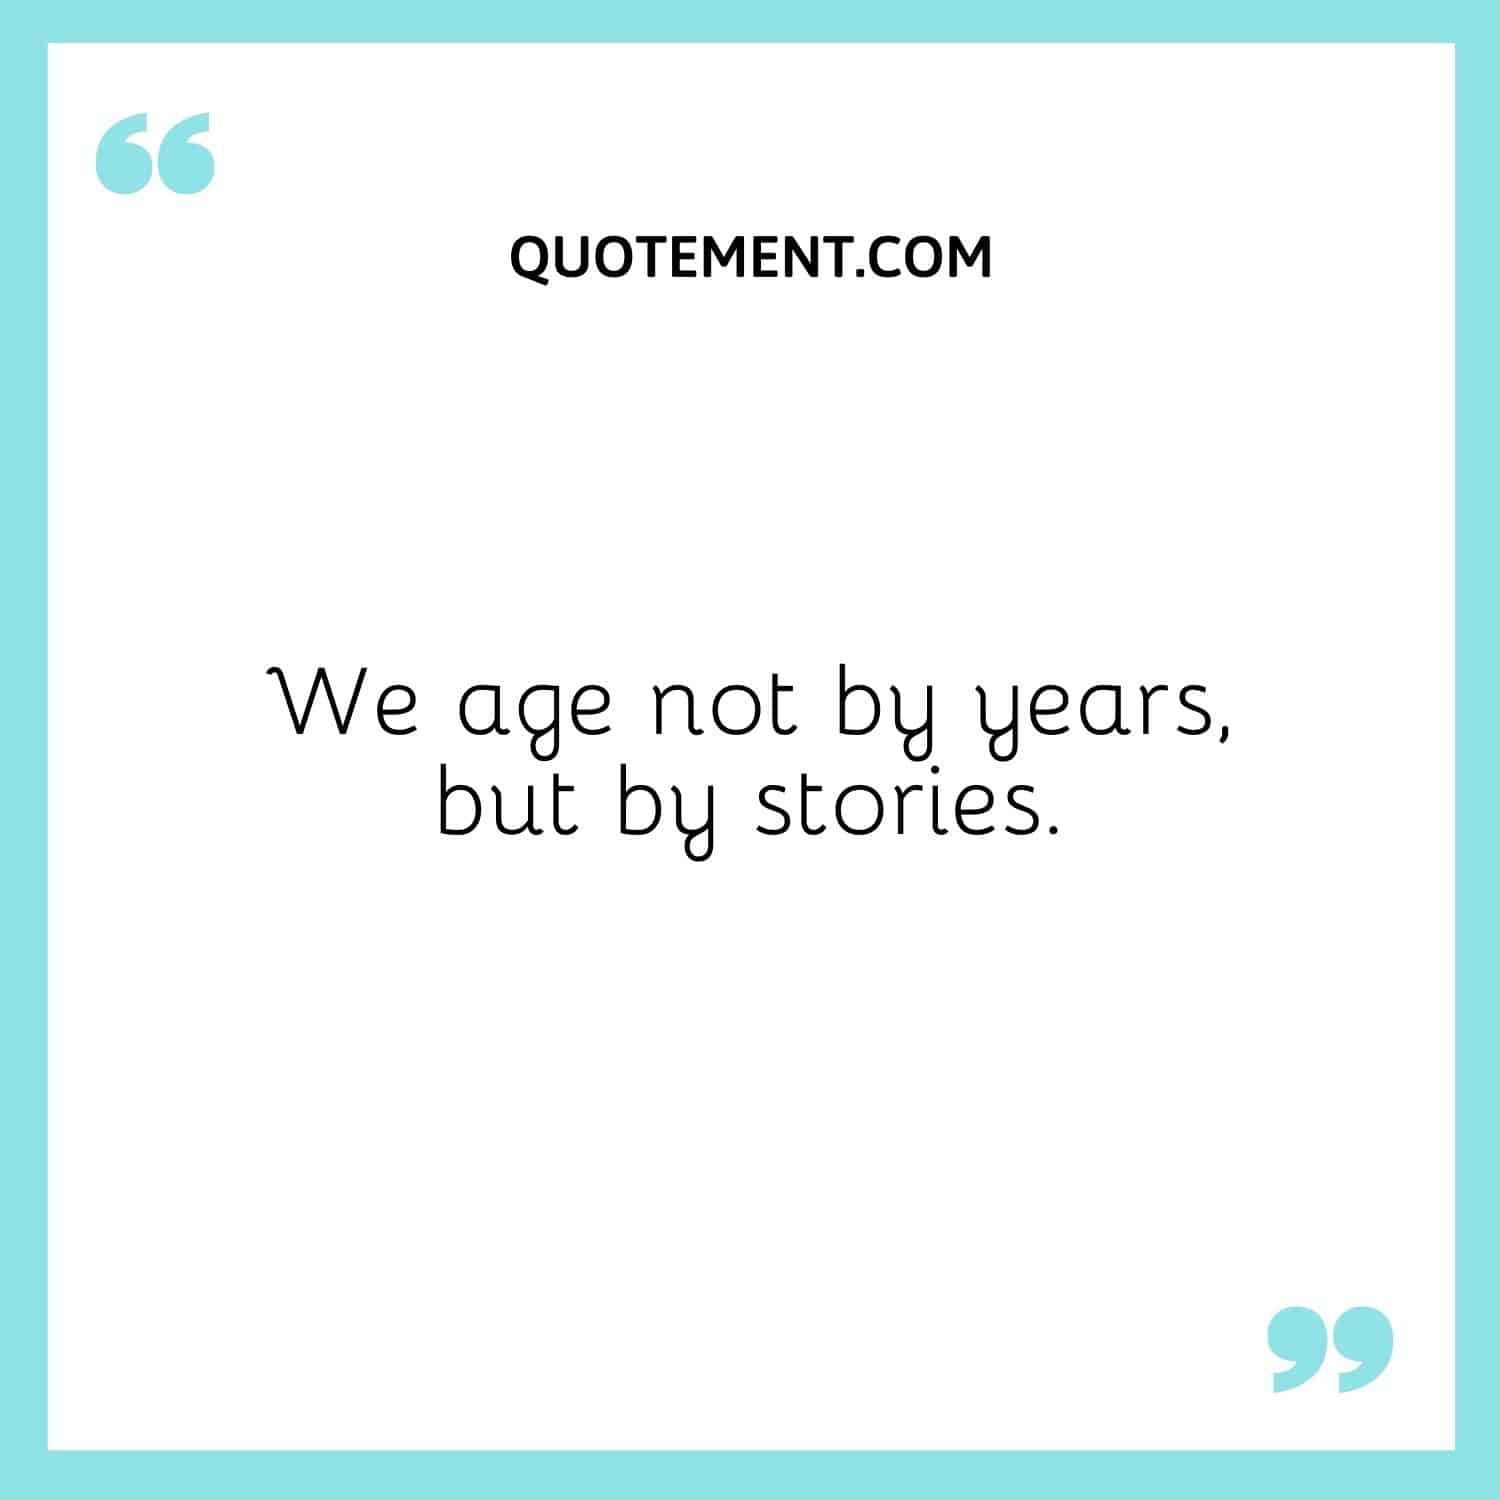 We age not by years, but by stories.